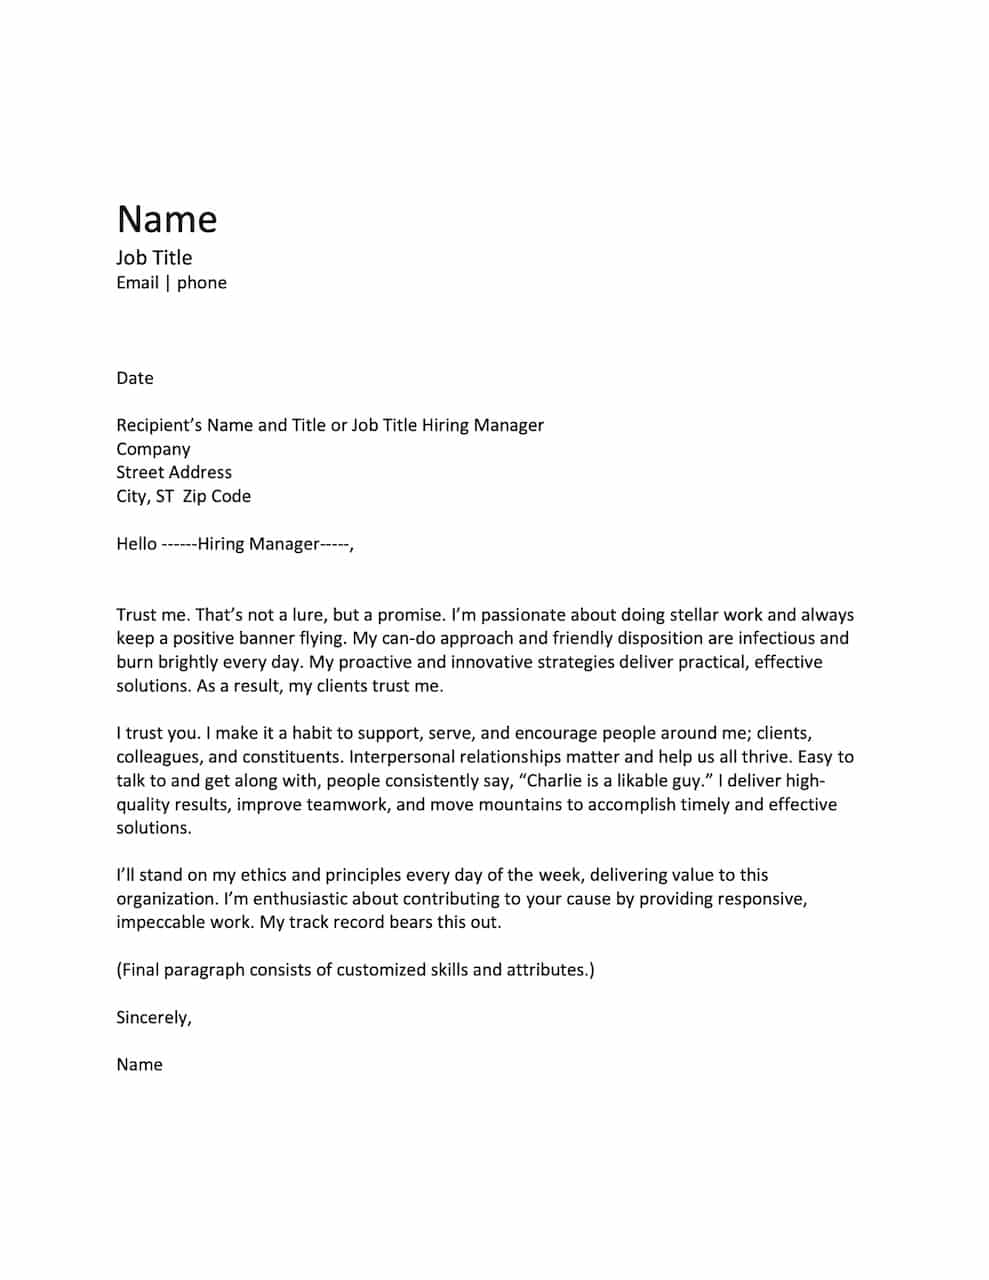 cover letters samples pdf